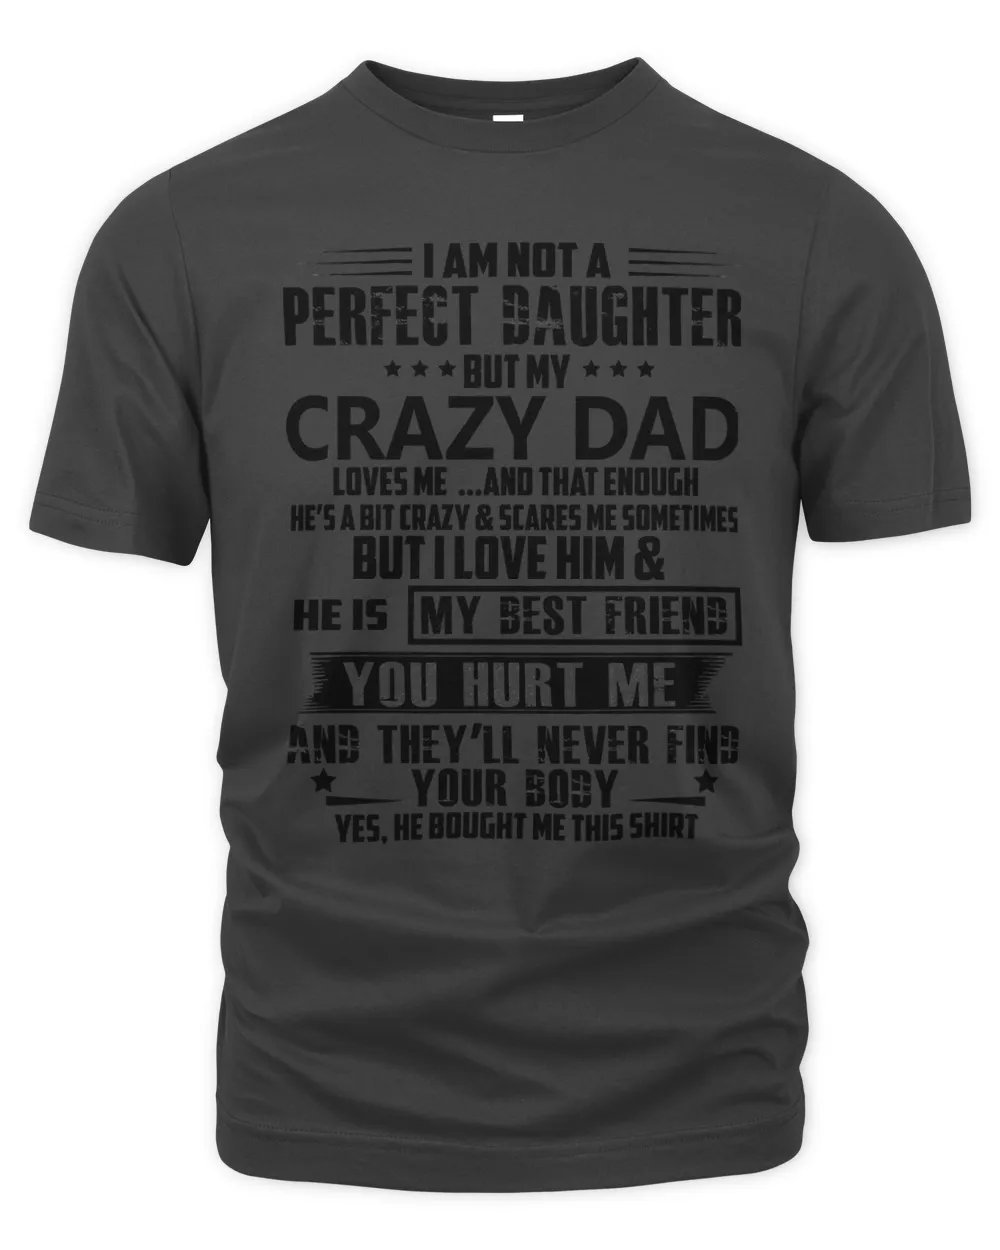 Father Im Not A Perfect Daughter But My Crazy Dad Loves Me 387 dad